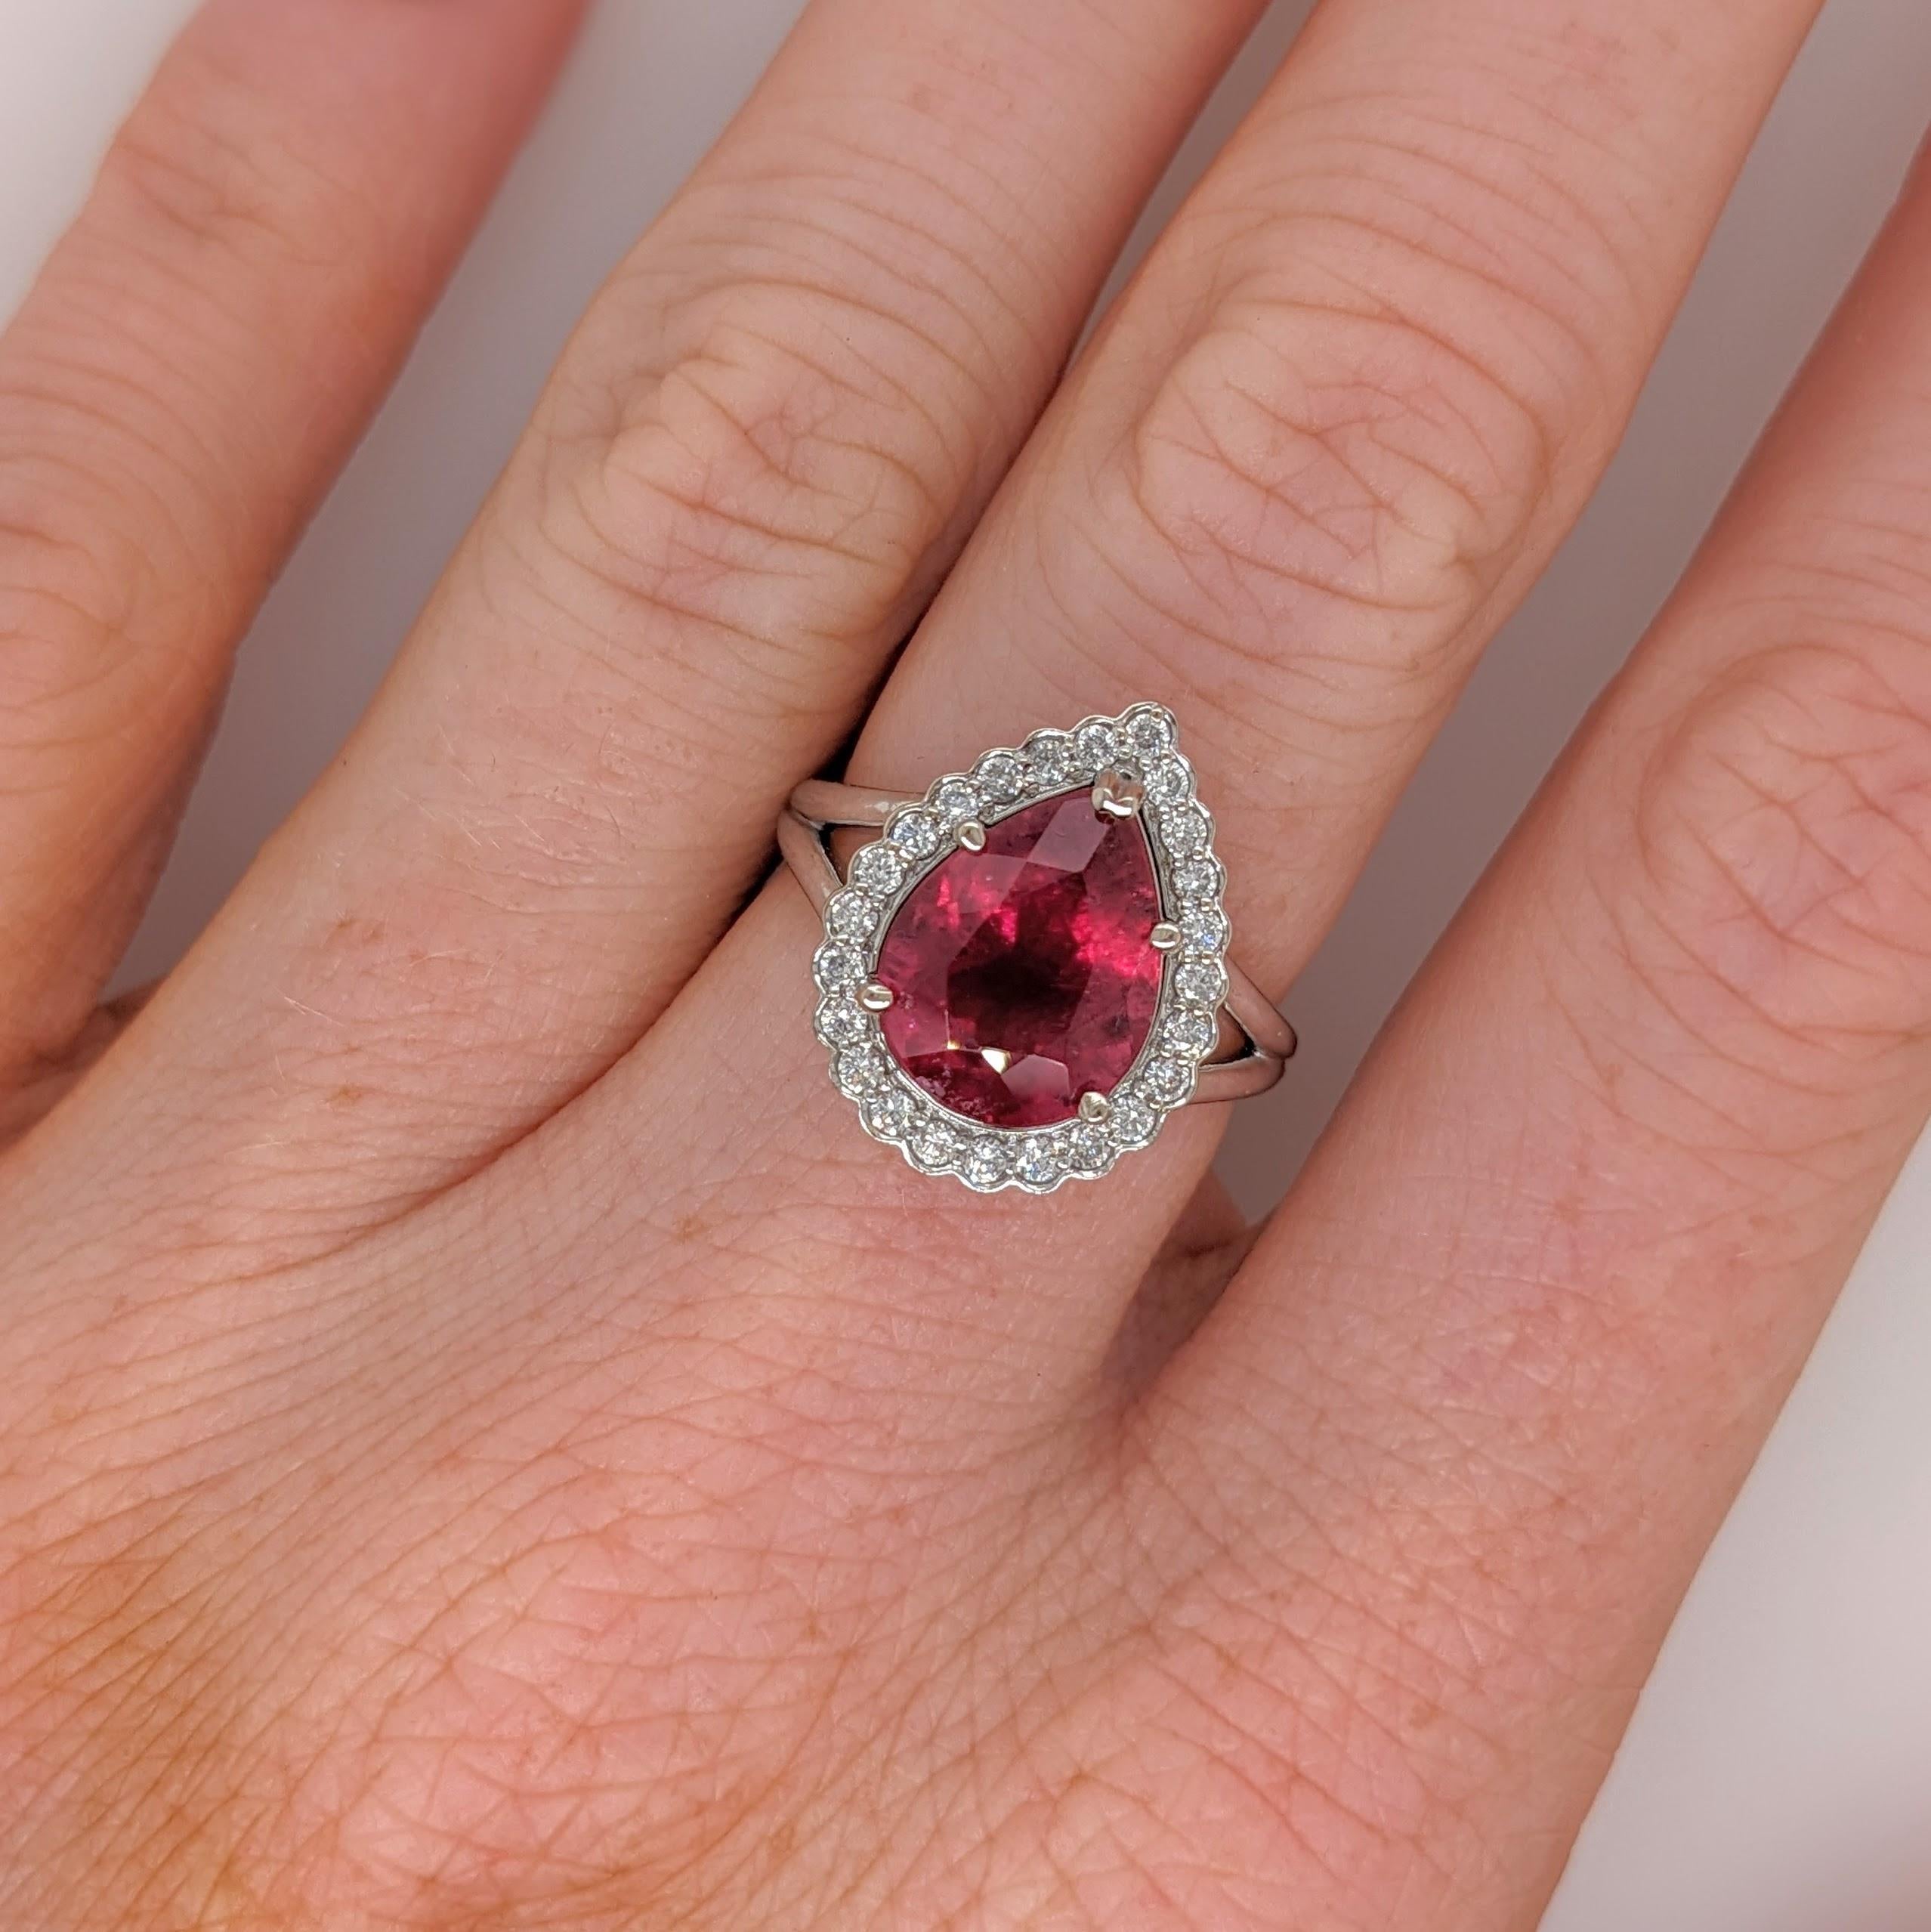 This beautiful ring features a 3.48 carat pear shape rubellite tourmaline gemstone with a halo of natural earth mined diamonds, all set in solid 14K gold. This ring can be a beautiful October birthstone gift for your loved ones!